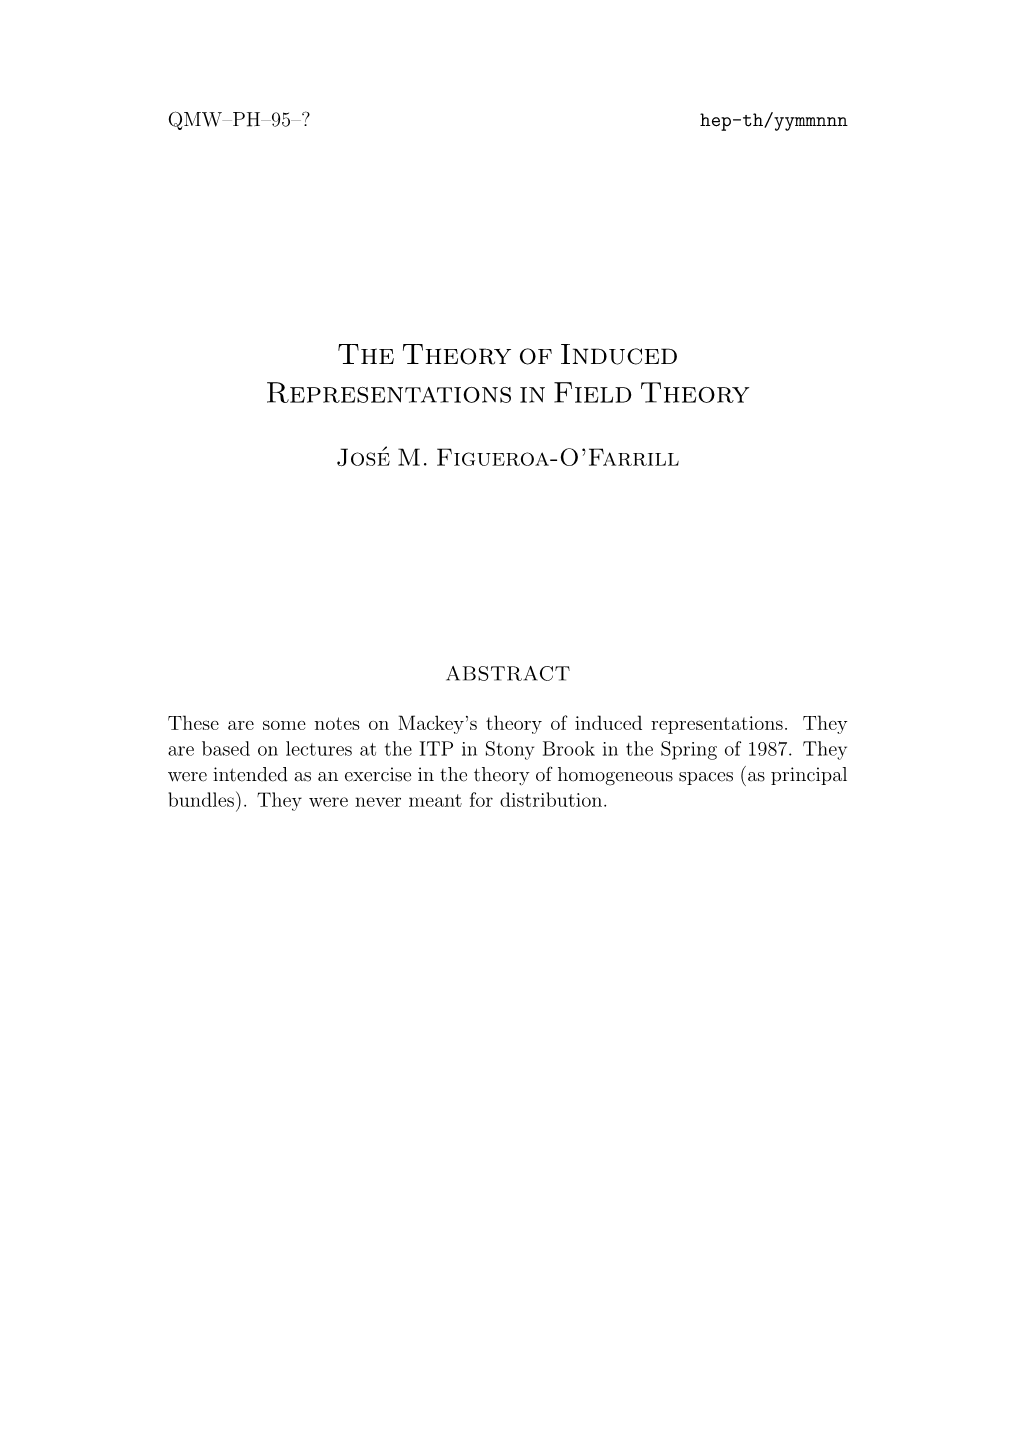 The Theory of Induced Representations in Field Theory